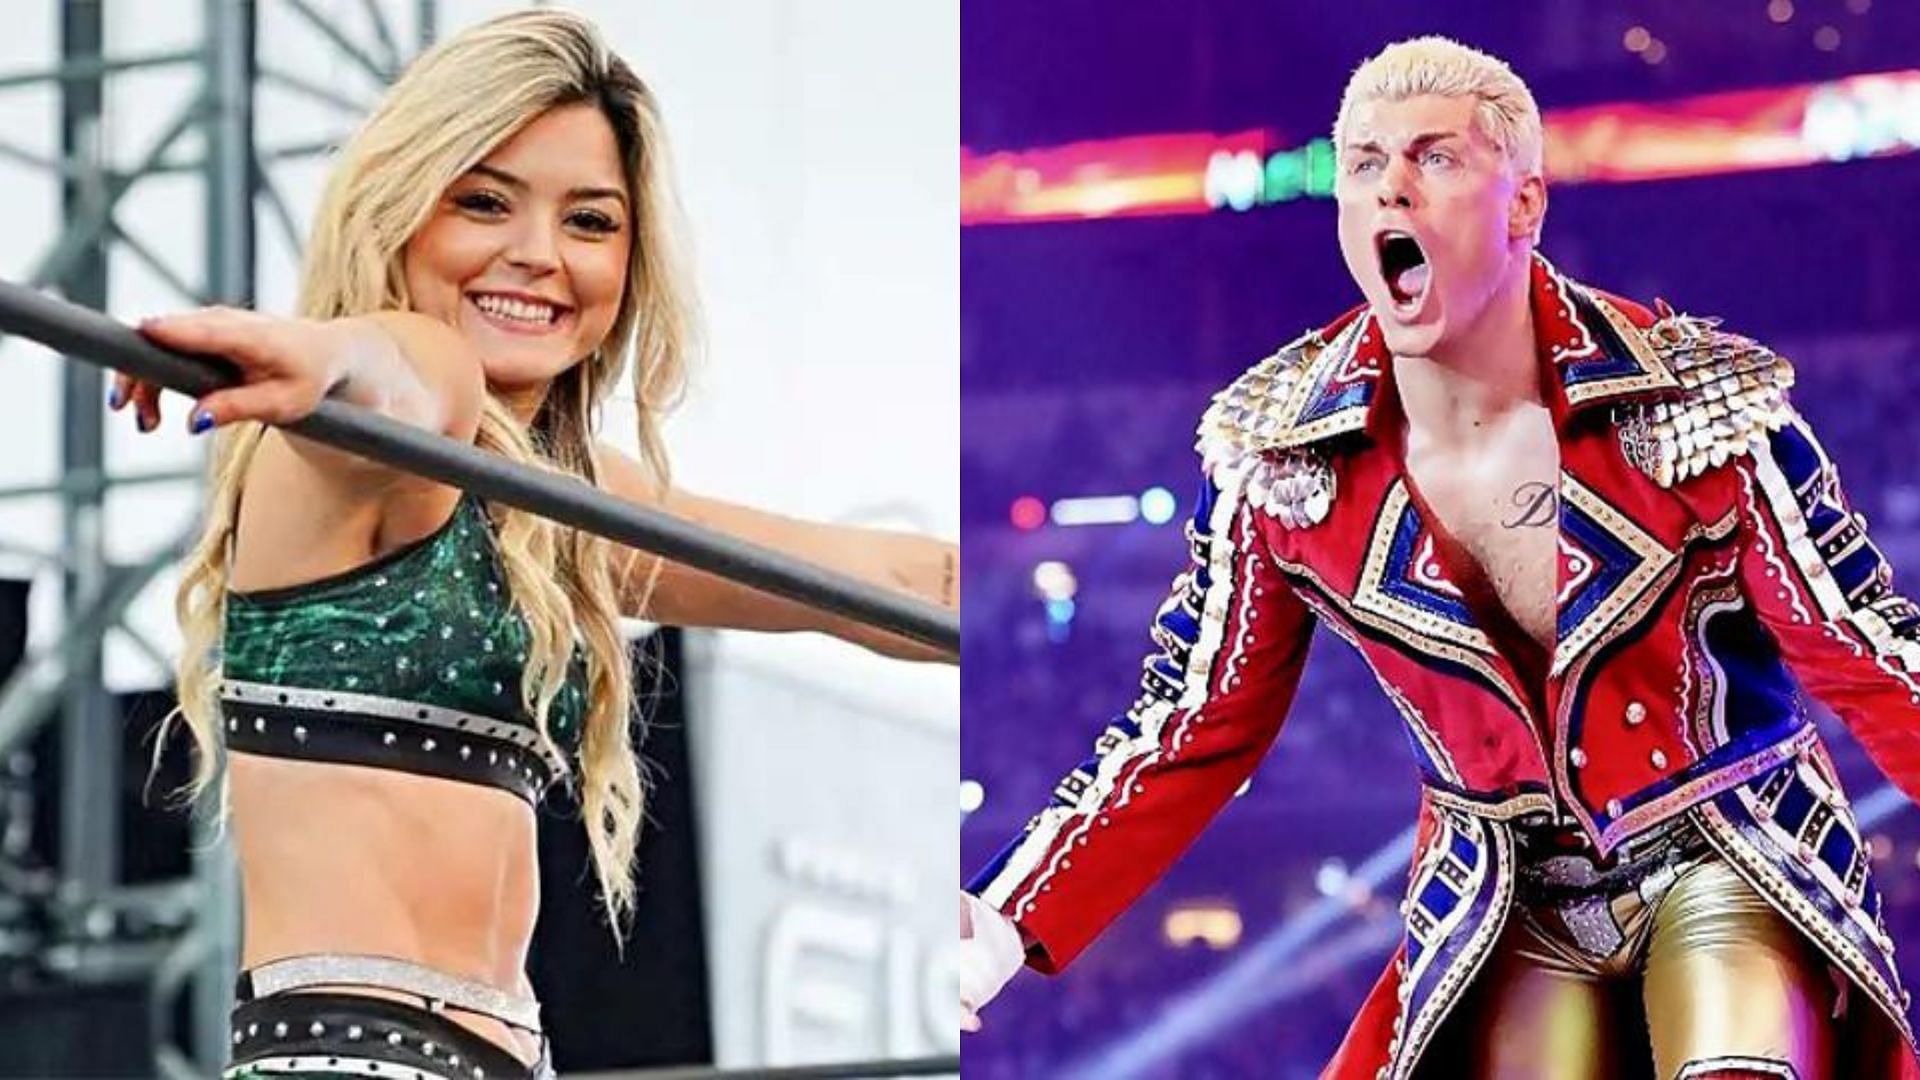 Tay Conti has reacted to Cody Rhodes